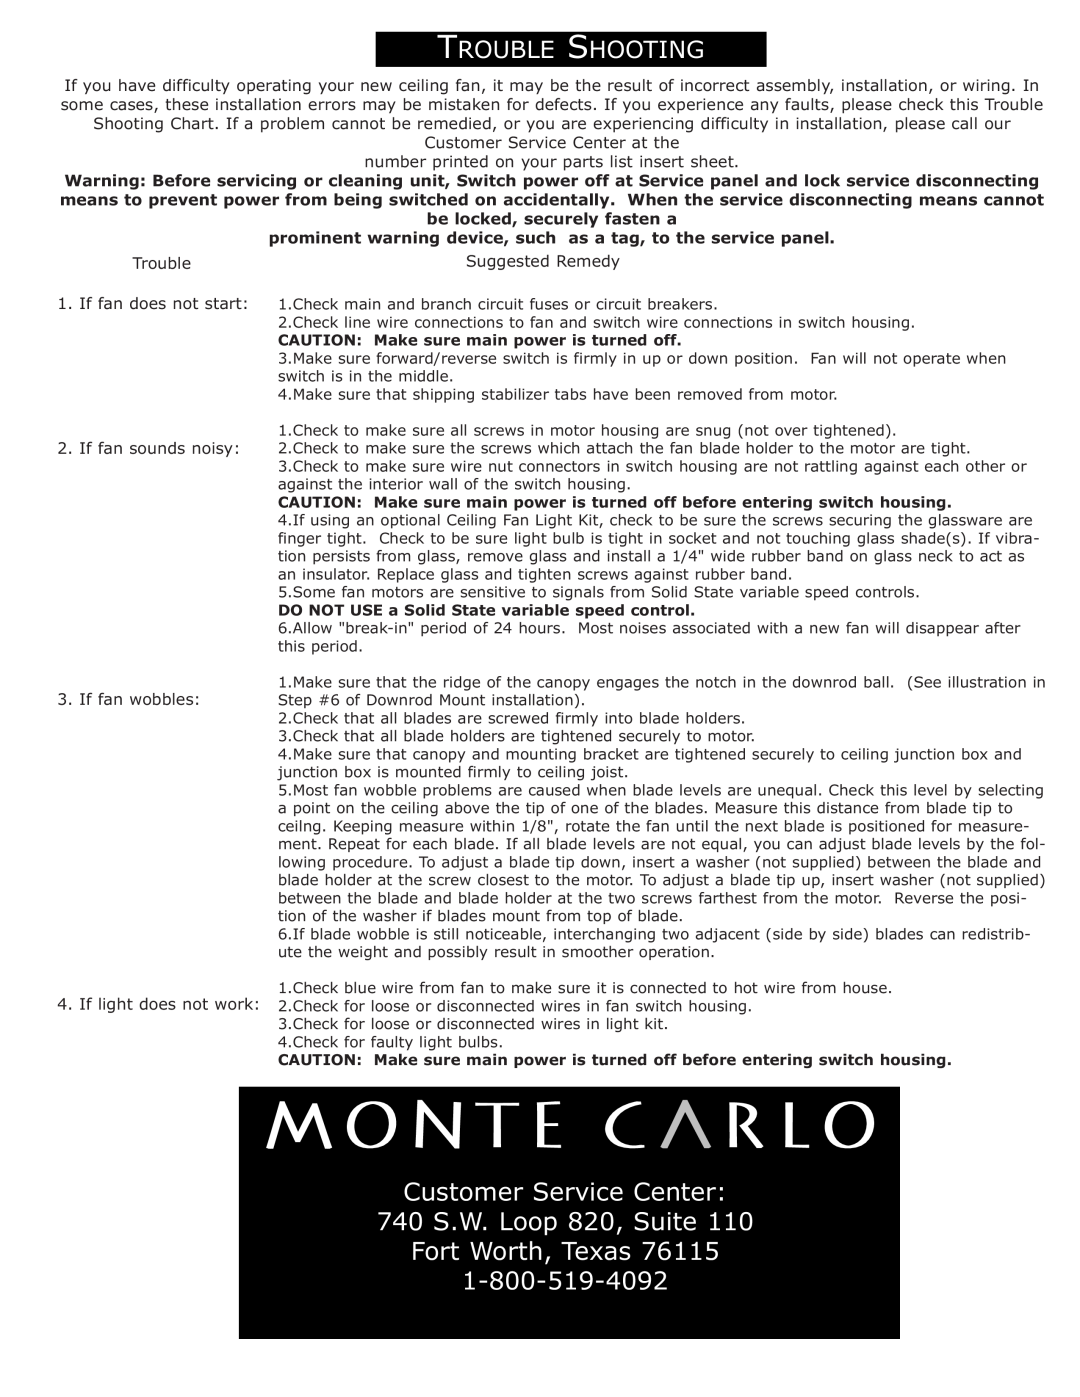 Monte Carlo Fan Company 5CO52 installation instructions Customer Service Center 740 S.W. Loop 820, Suite, Rouble Hooting 